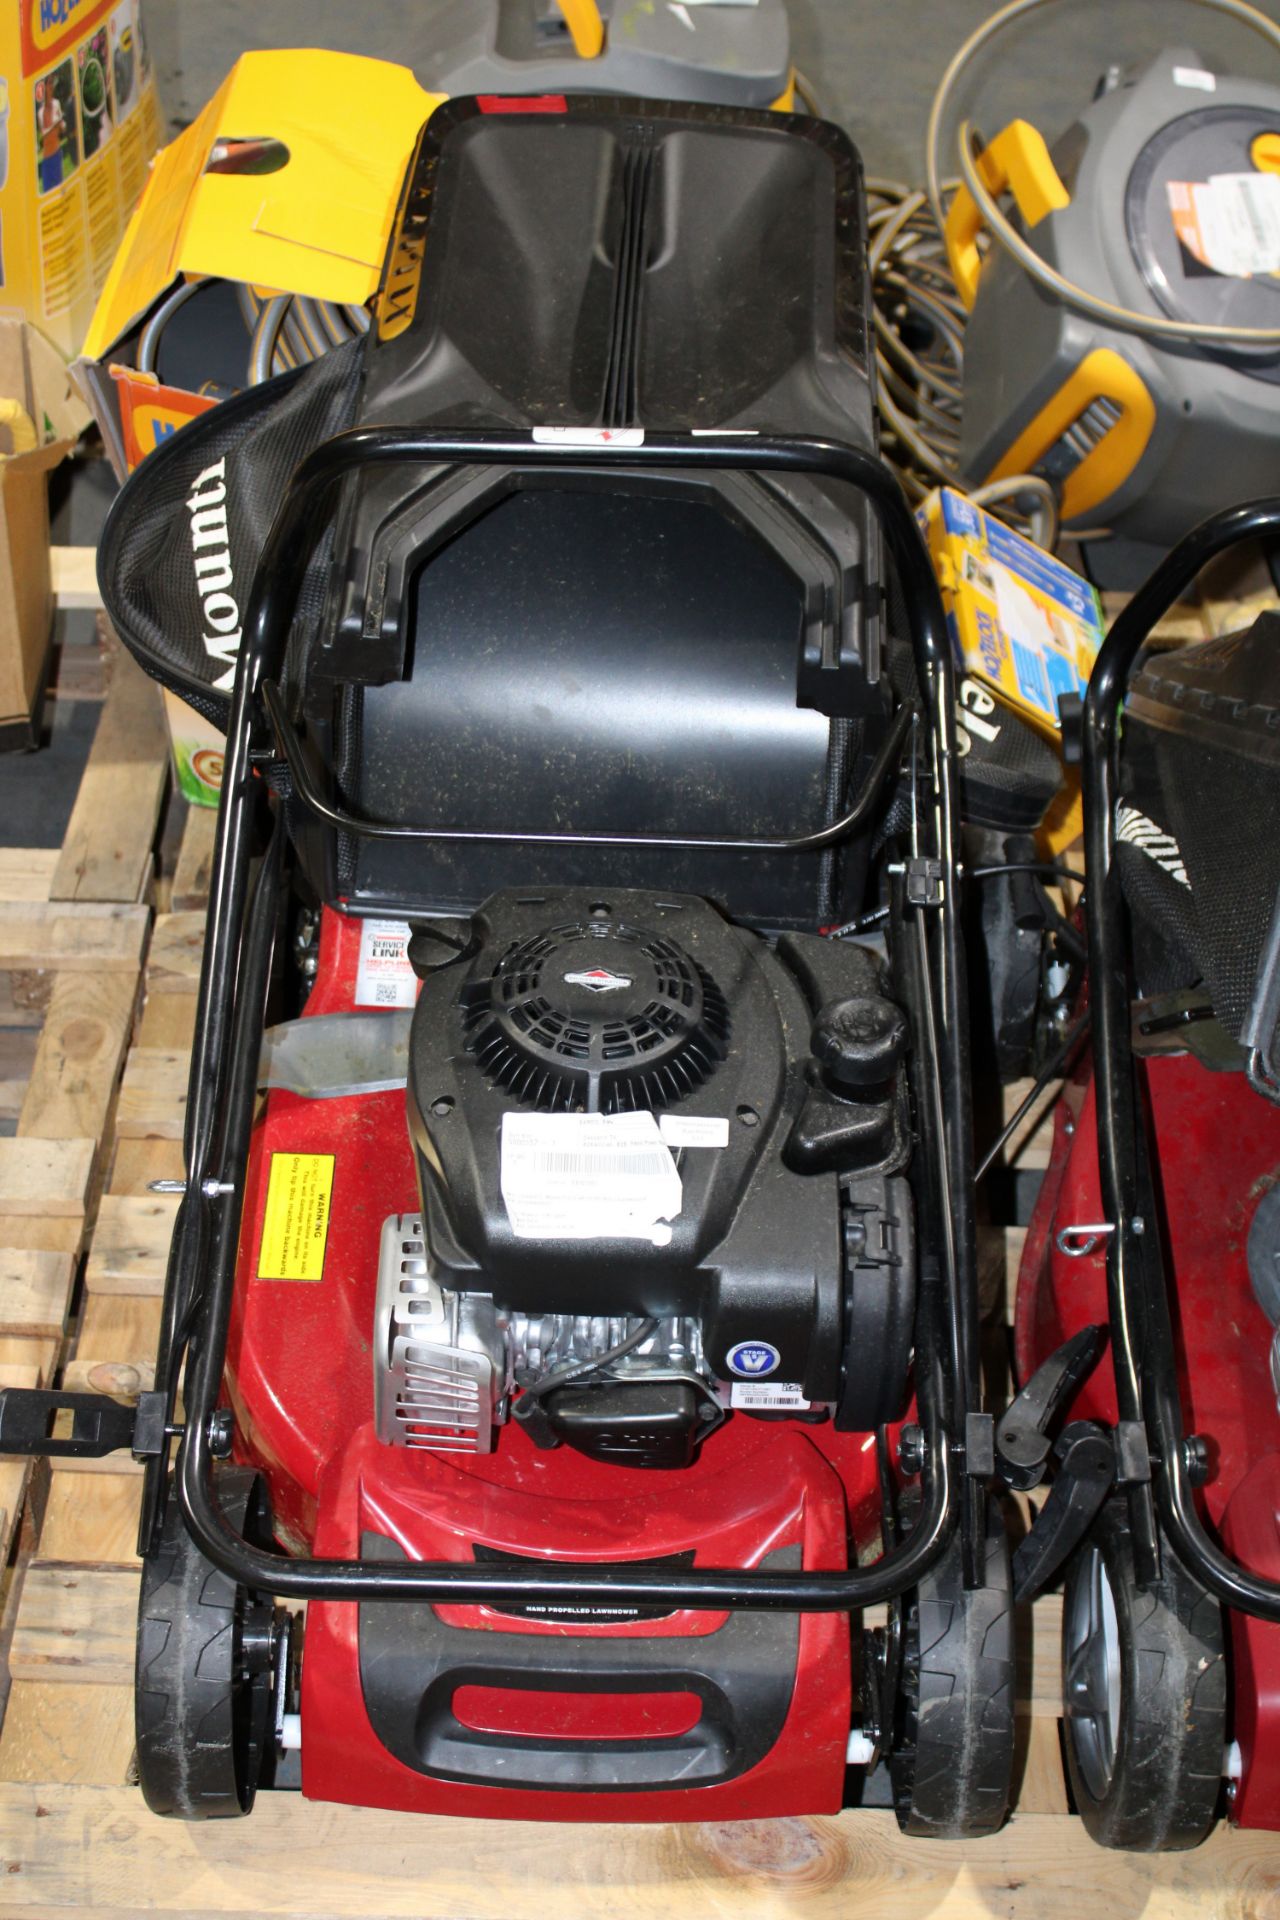 MOUNTFIELD HP185 PETROL LAWNMOWER Â£270.28Condition ReportAppraisal Available on Request- All